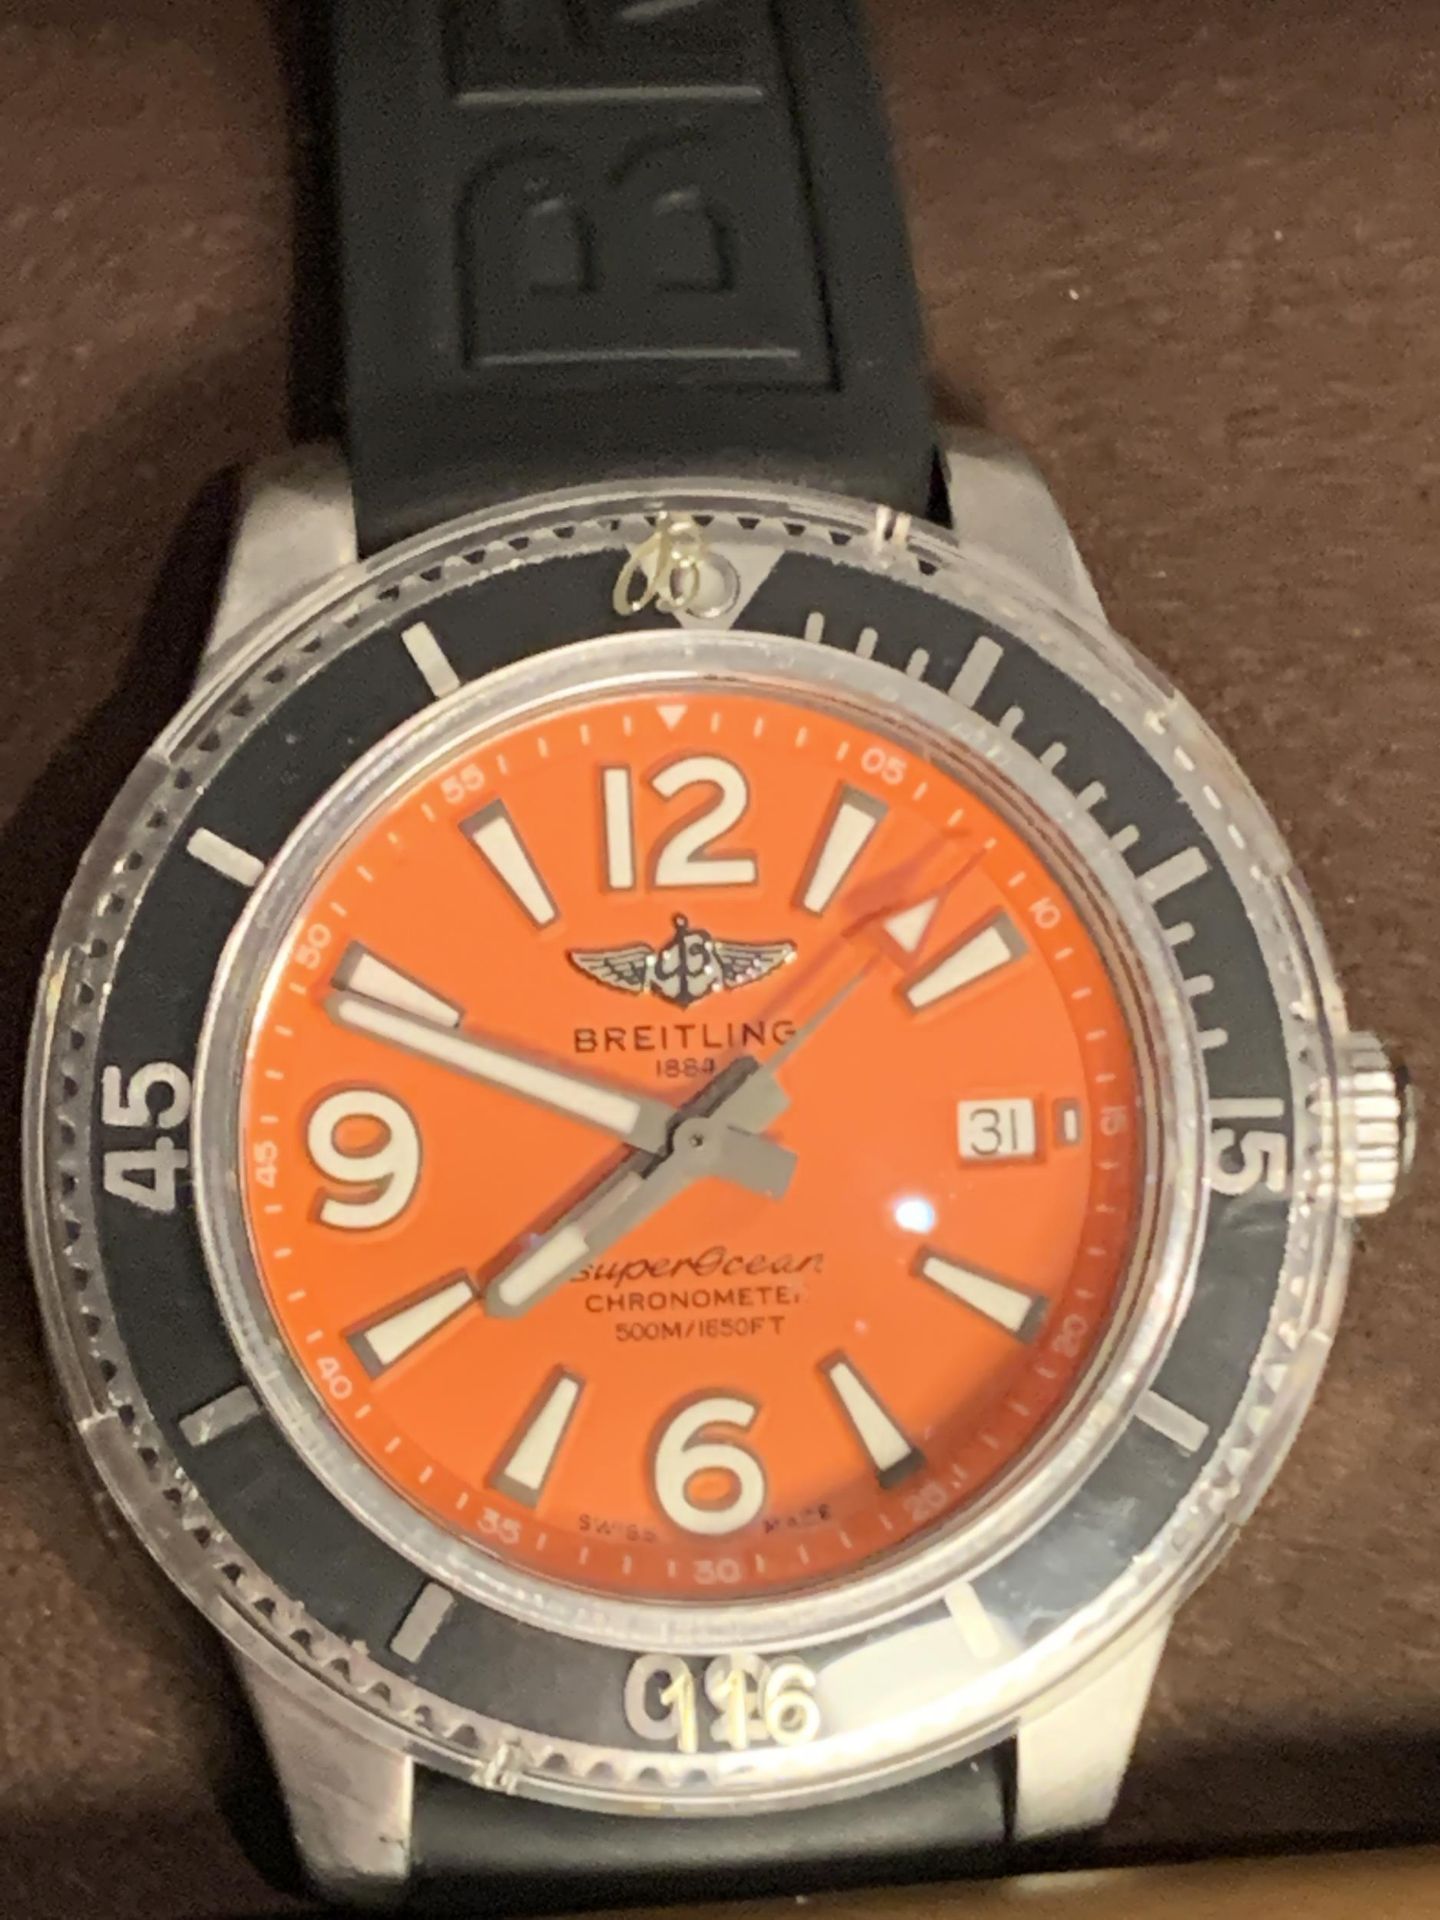 A BREITLING SUPEROCEAN AUTOMATIC 42 SERIAL NUMBER 6233918 WRIST WATCH WITH ORIGINAL BOX, CARD AND - Image 3 of 8